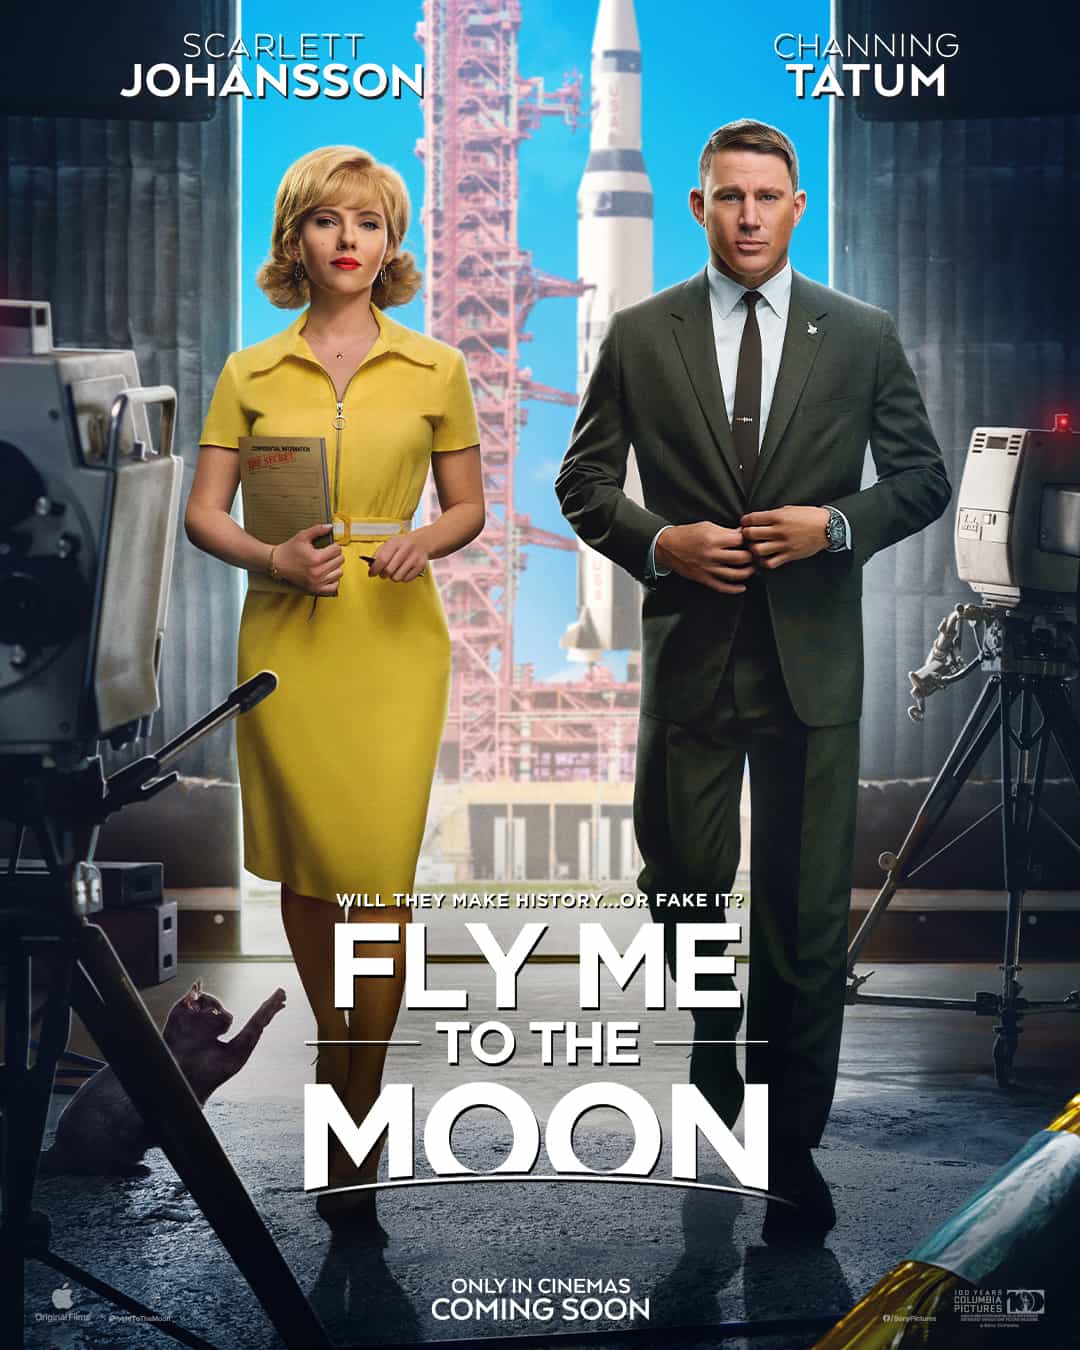 New poster has been released for Fly Me to the Moon which stars Scarlett Johansson and Channing Tatum - movie UK release date 12th July 2024 #flymetothemoon